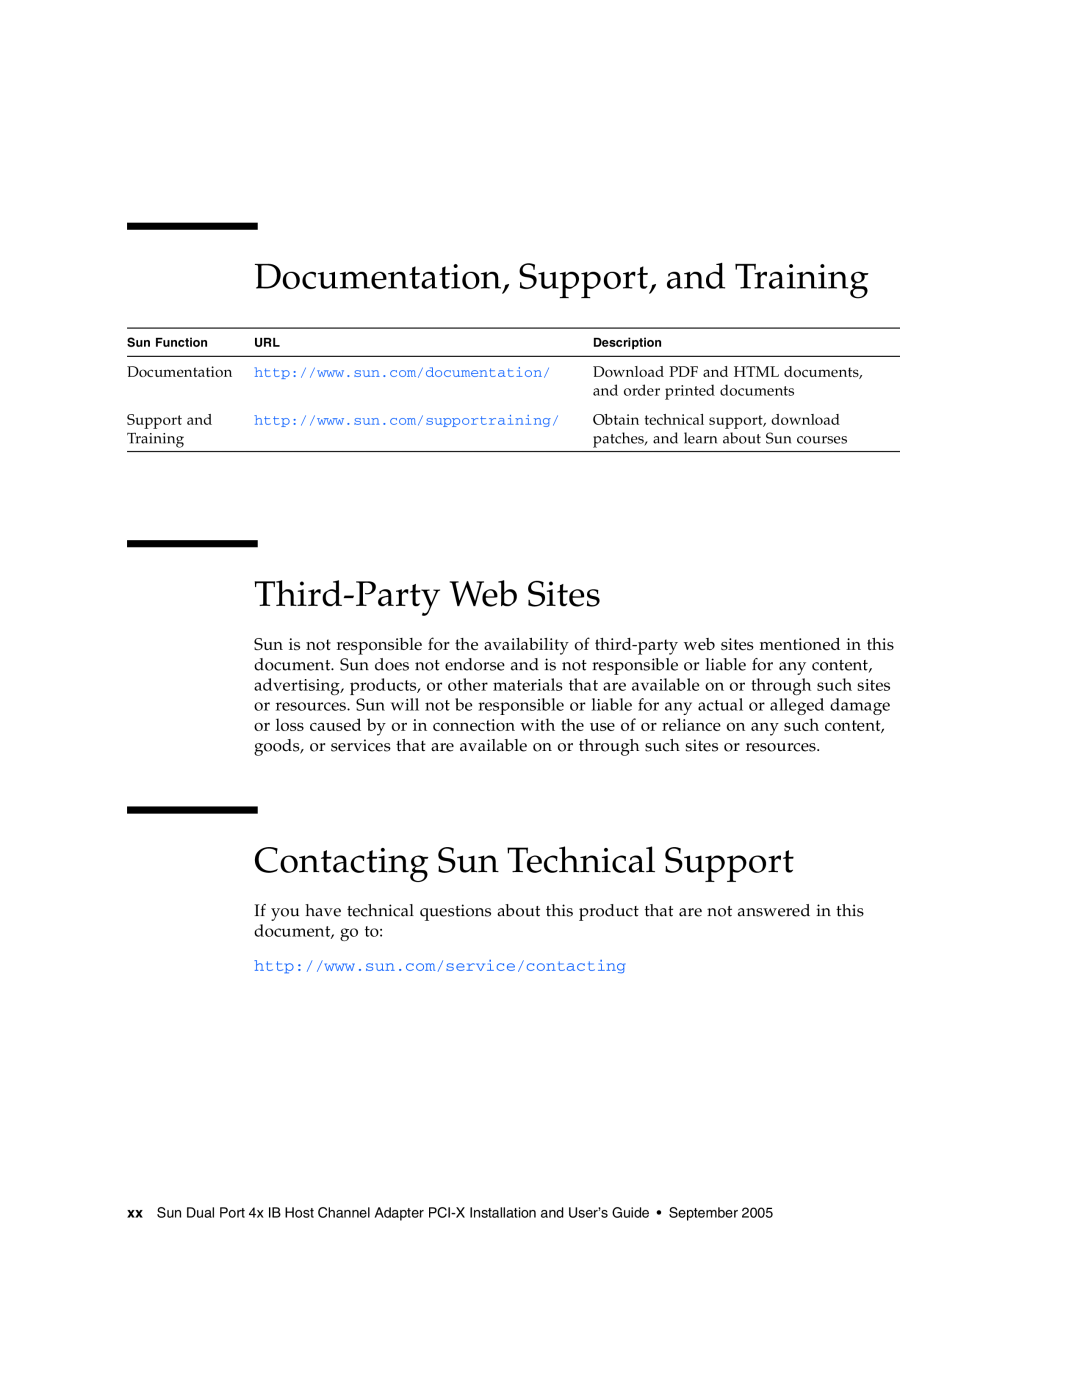 Sun Microsystems PCI manual Documentation, Support, and Training, Third-Party Web Sites, Contacting Sun Technical Support 